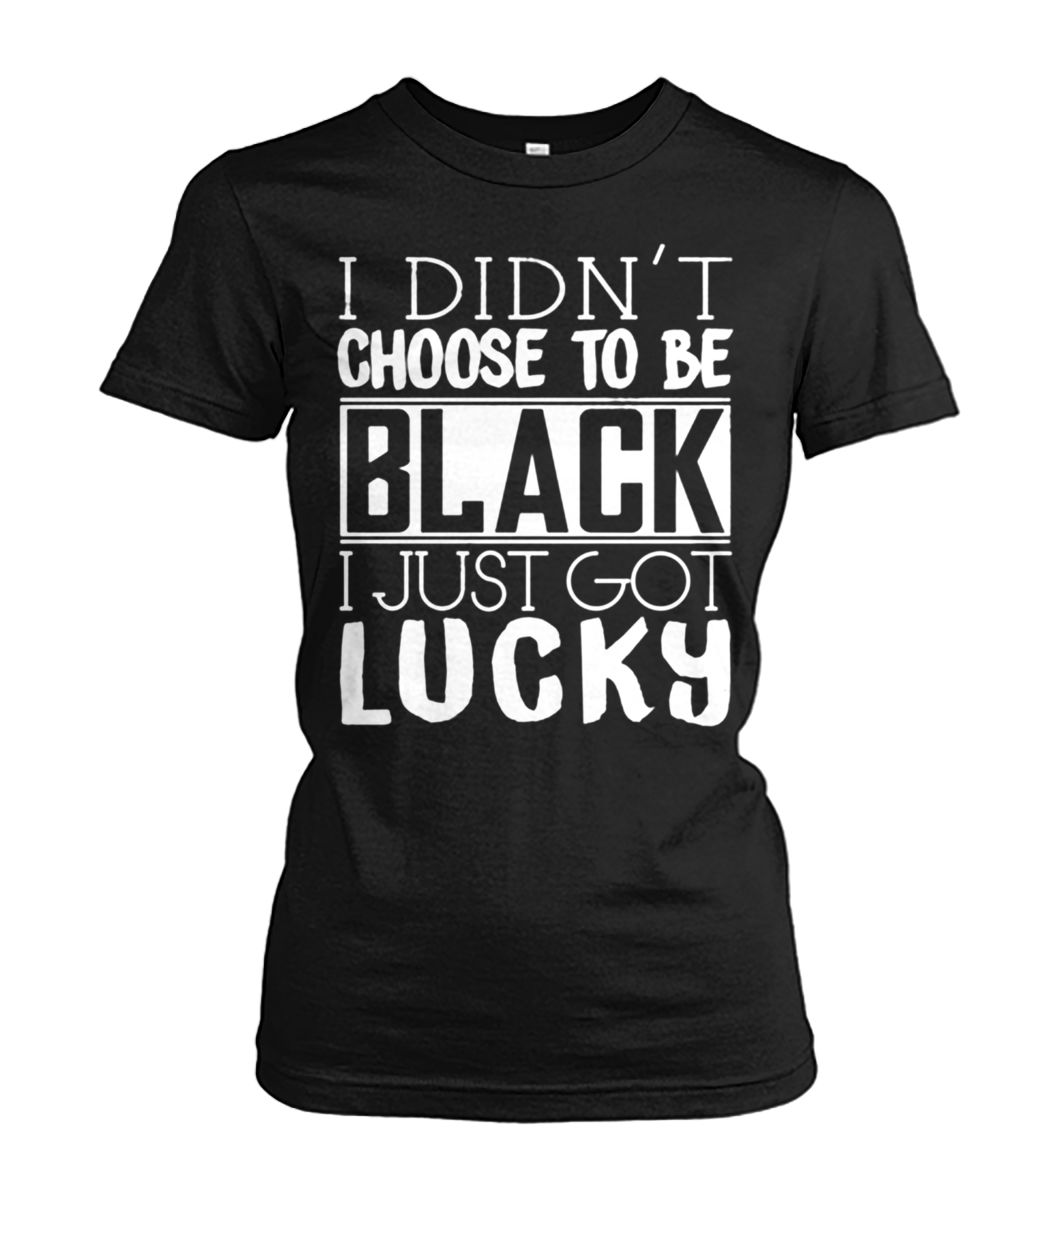 I didn't choose to be black I just got lucky women's crew tee